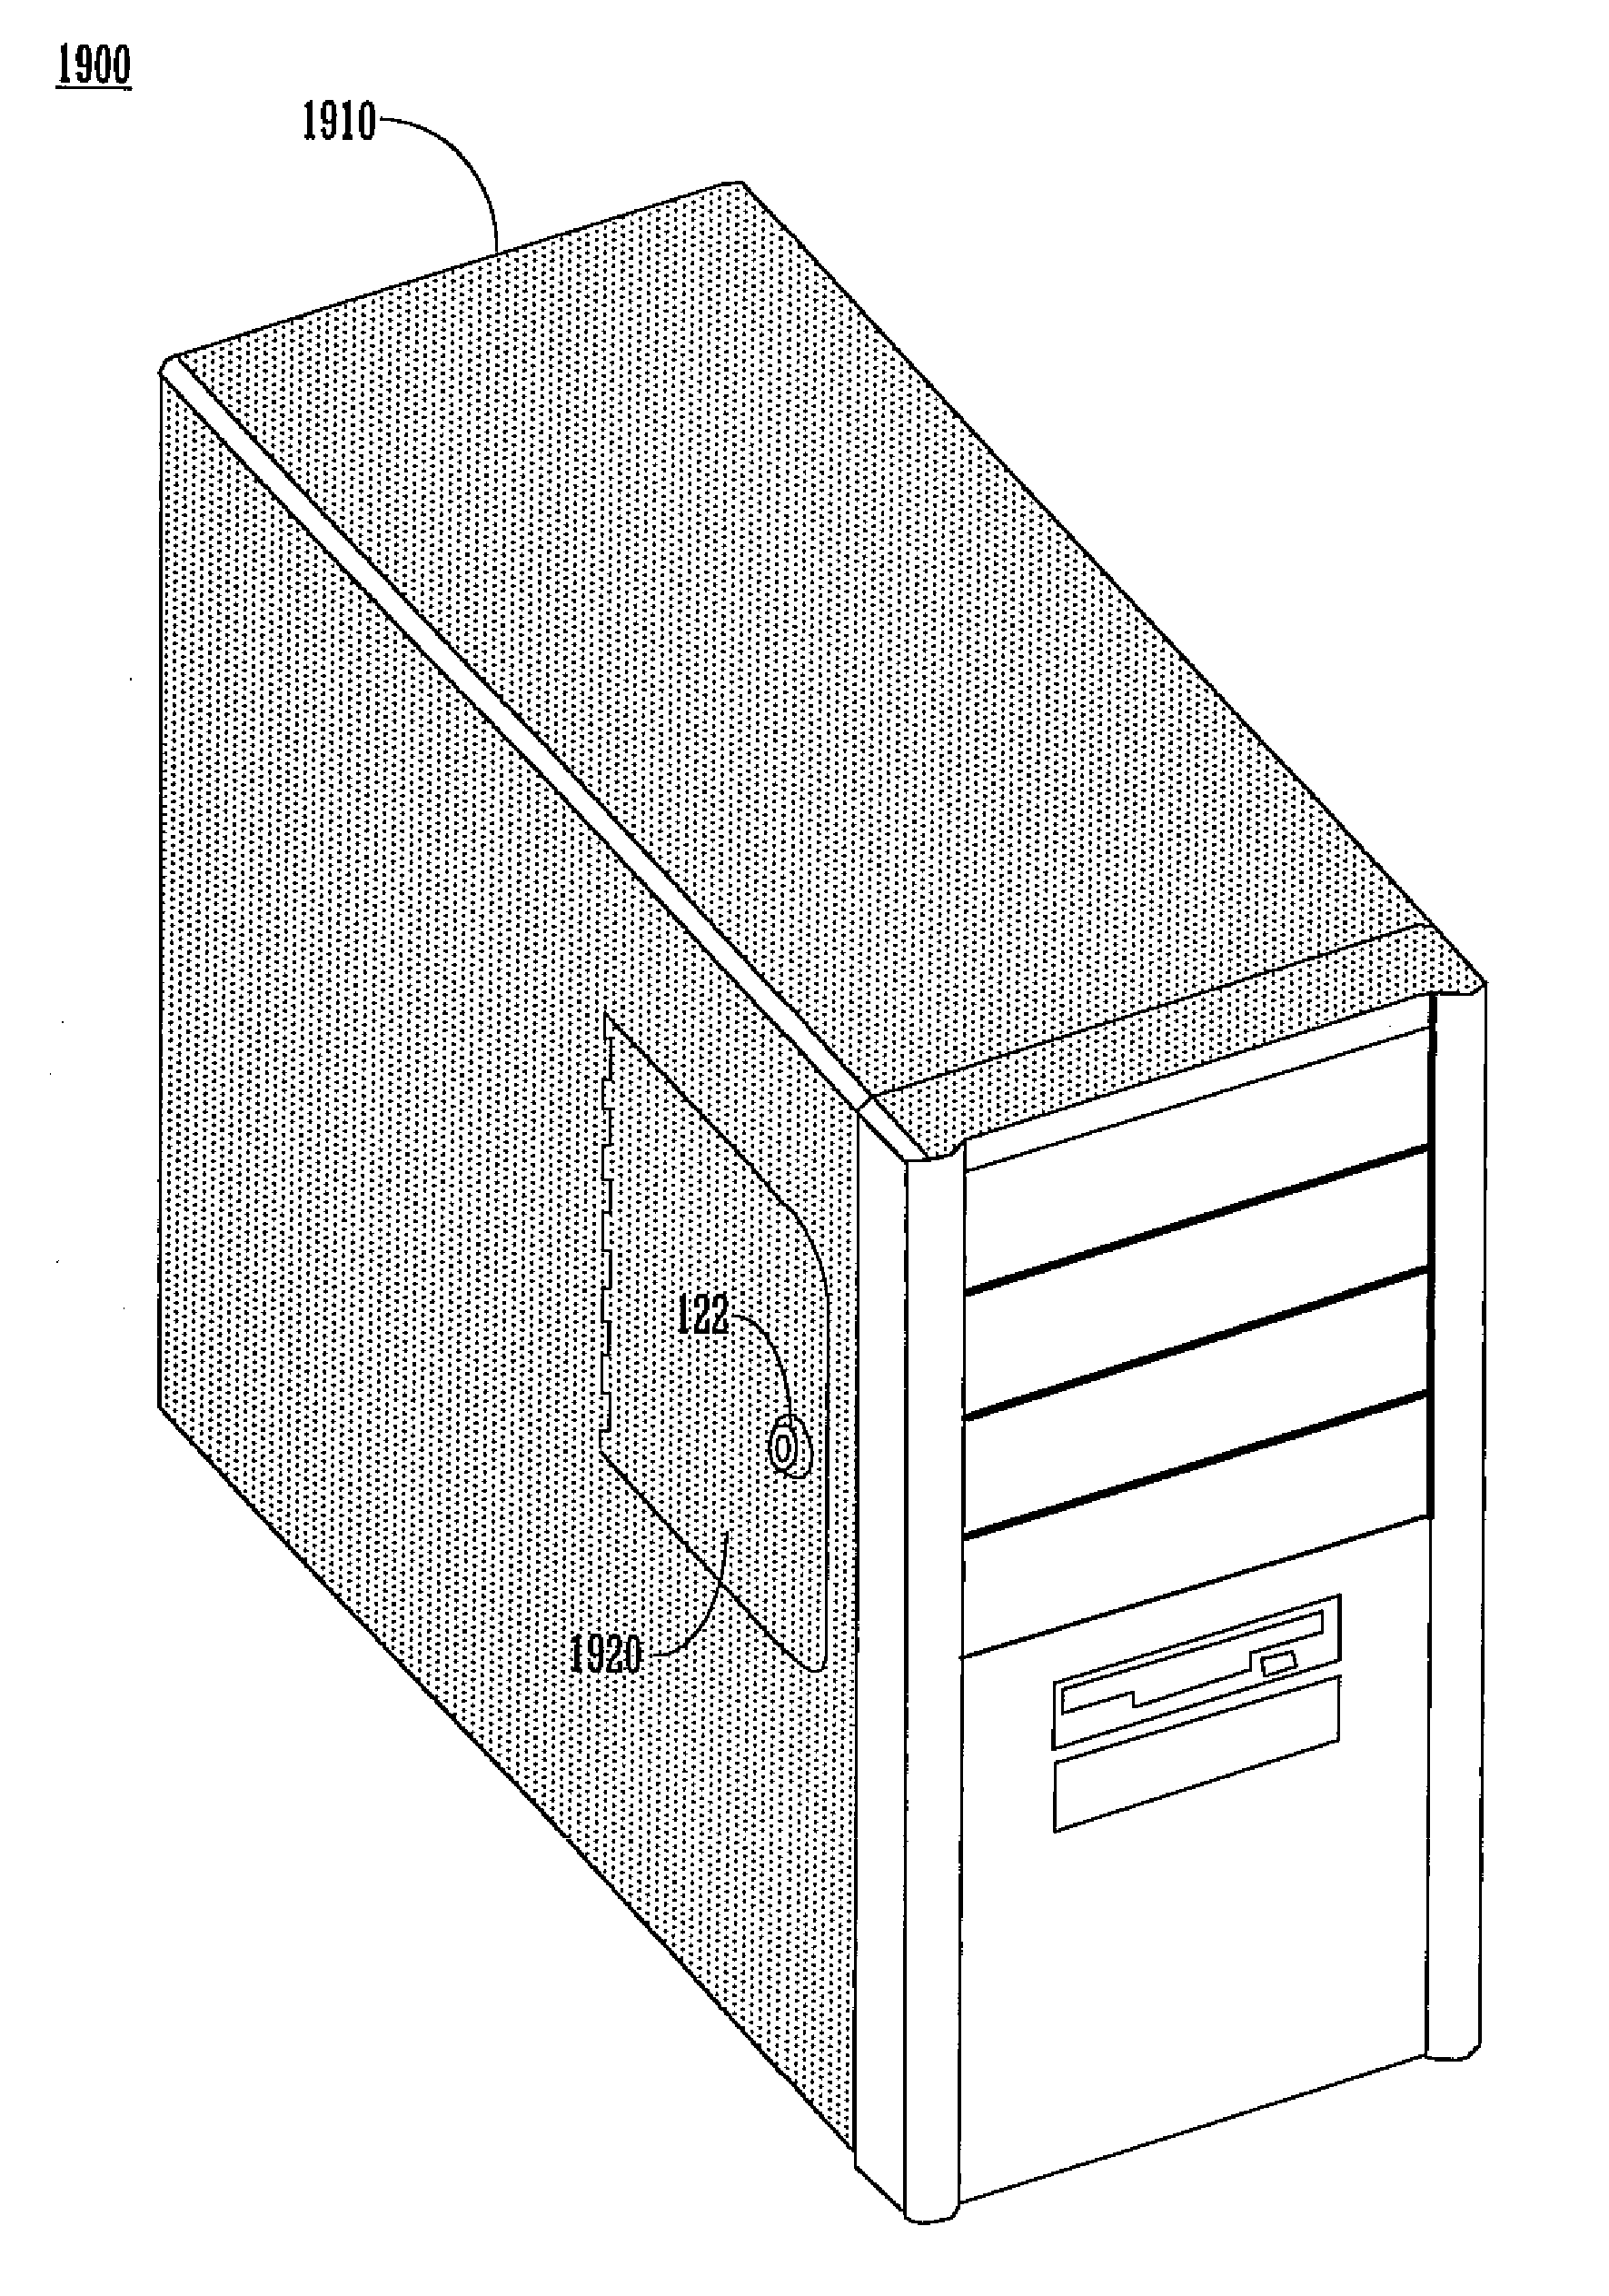 Computer chassis for improved security and connectivity of secured items